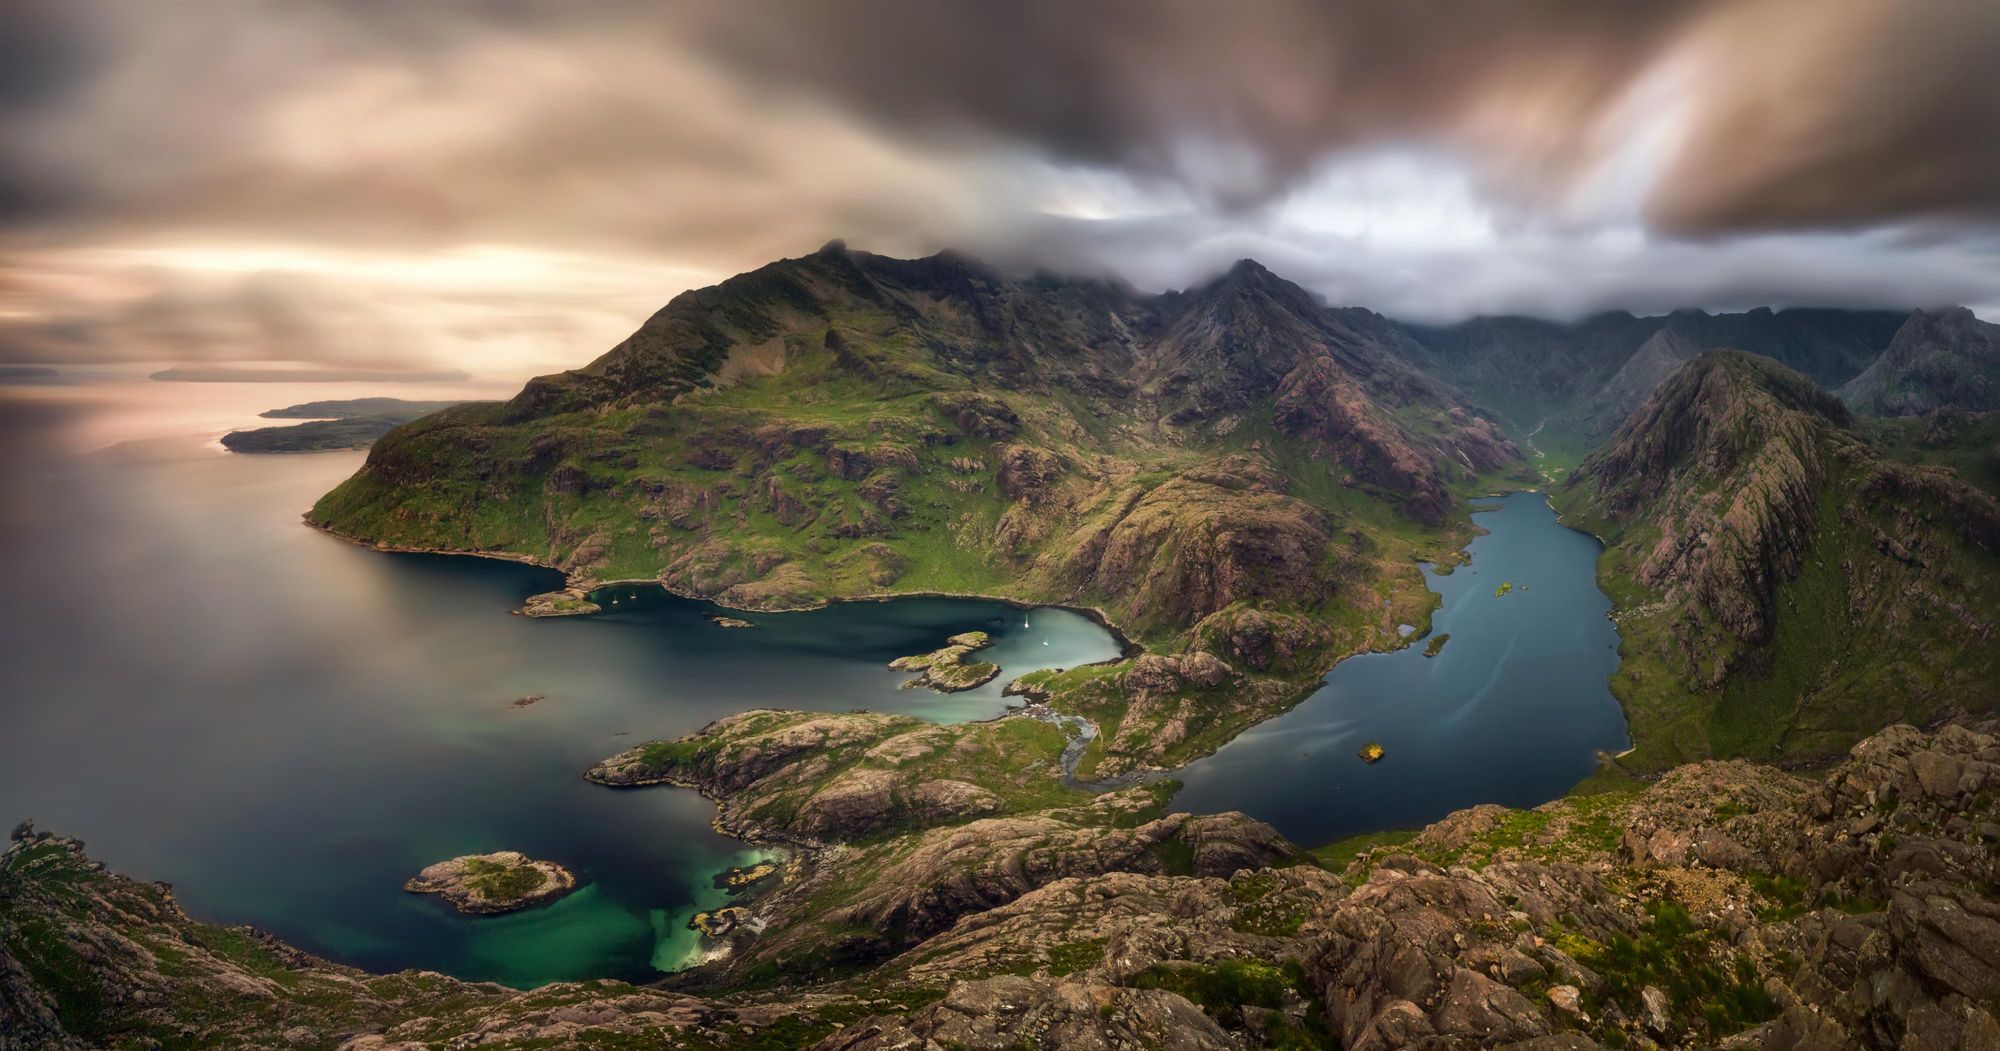 The remarkable view from the summit of Sgùrr na Strì, looking down on Loch Coruisk and the sea. Photo: Getty